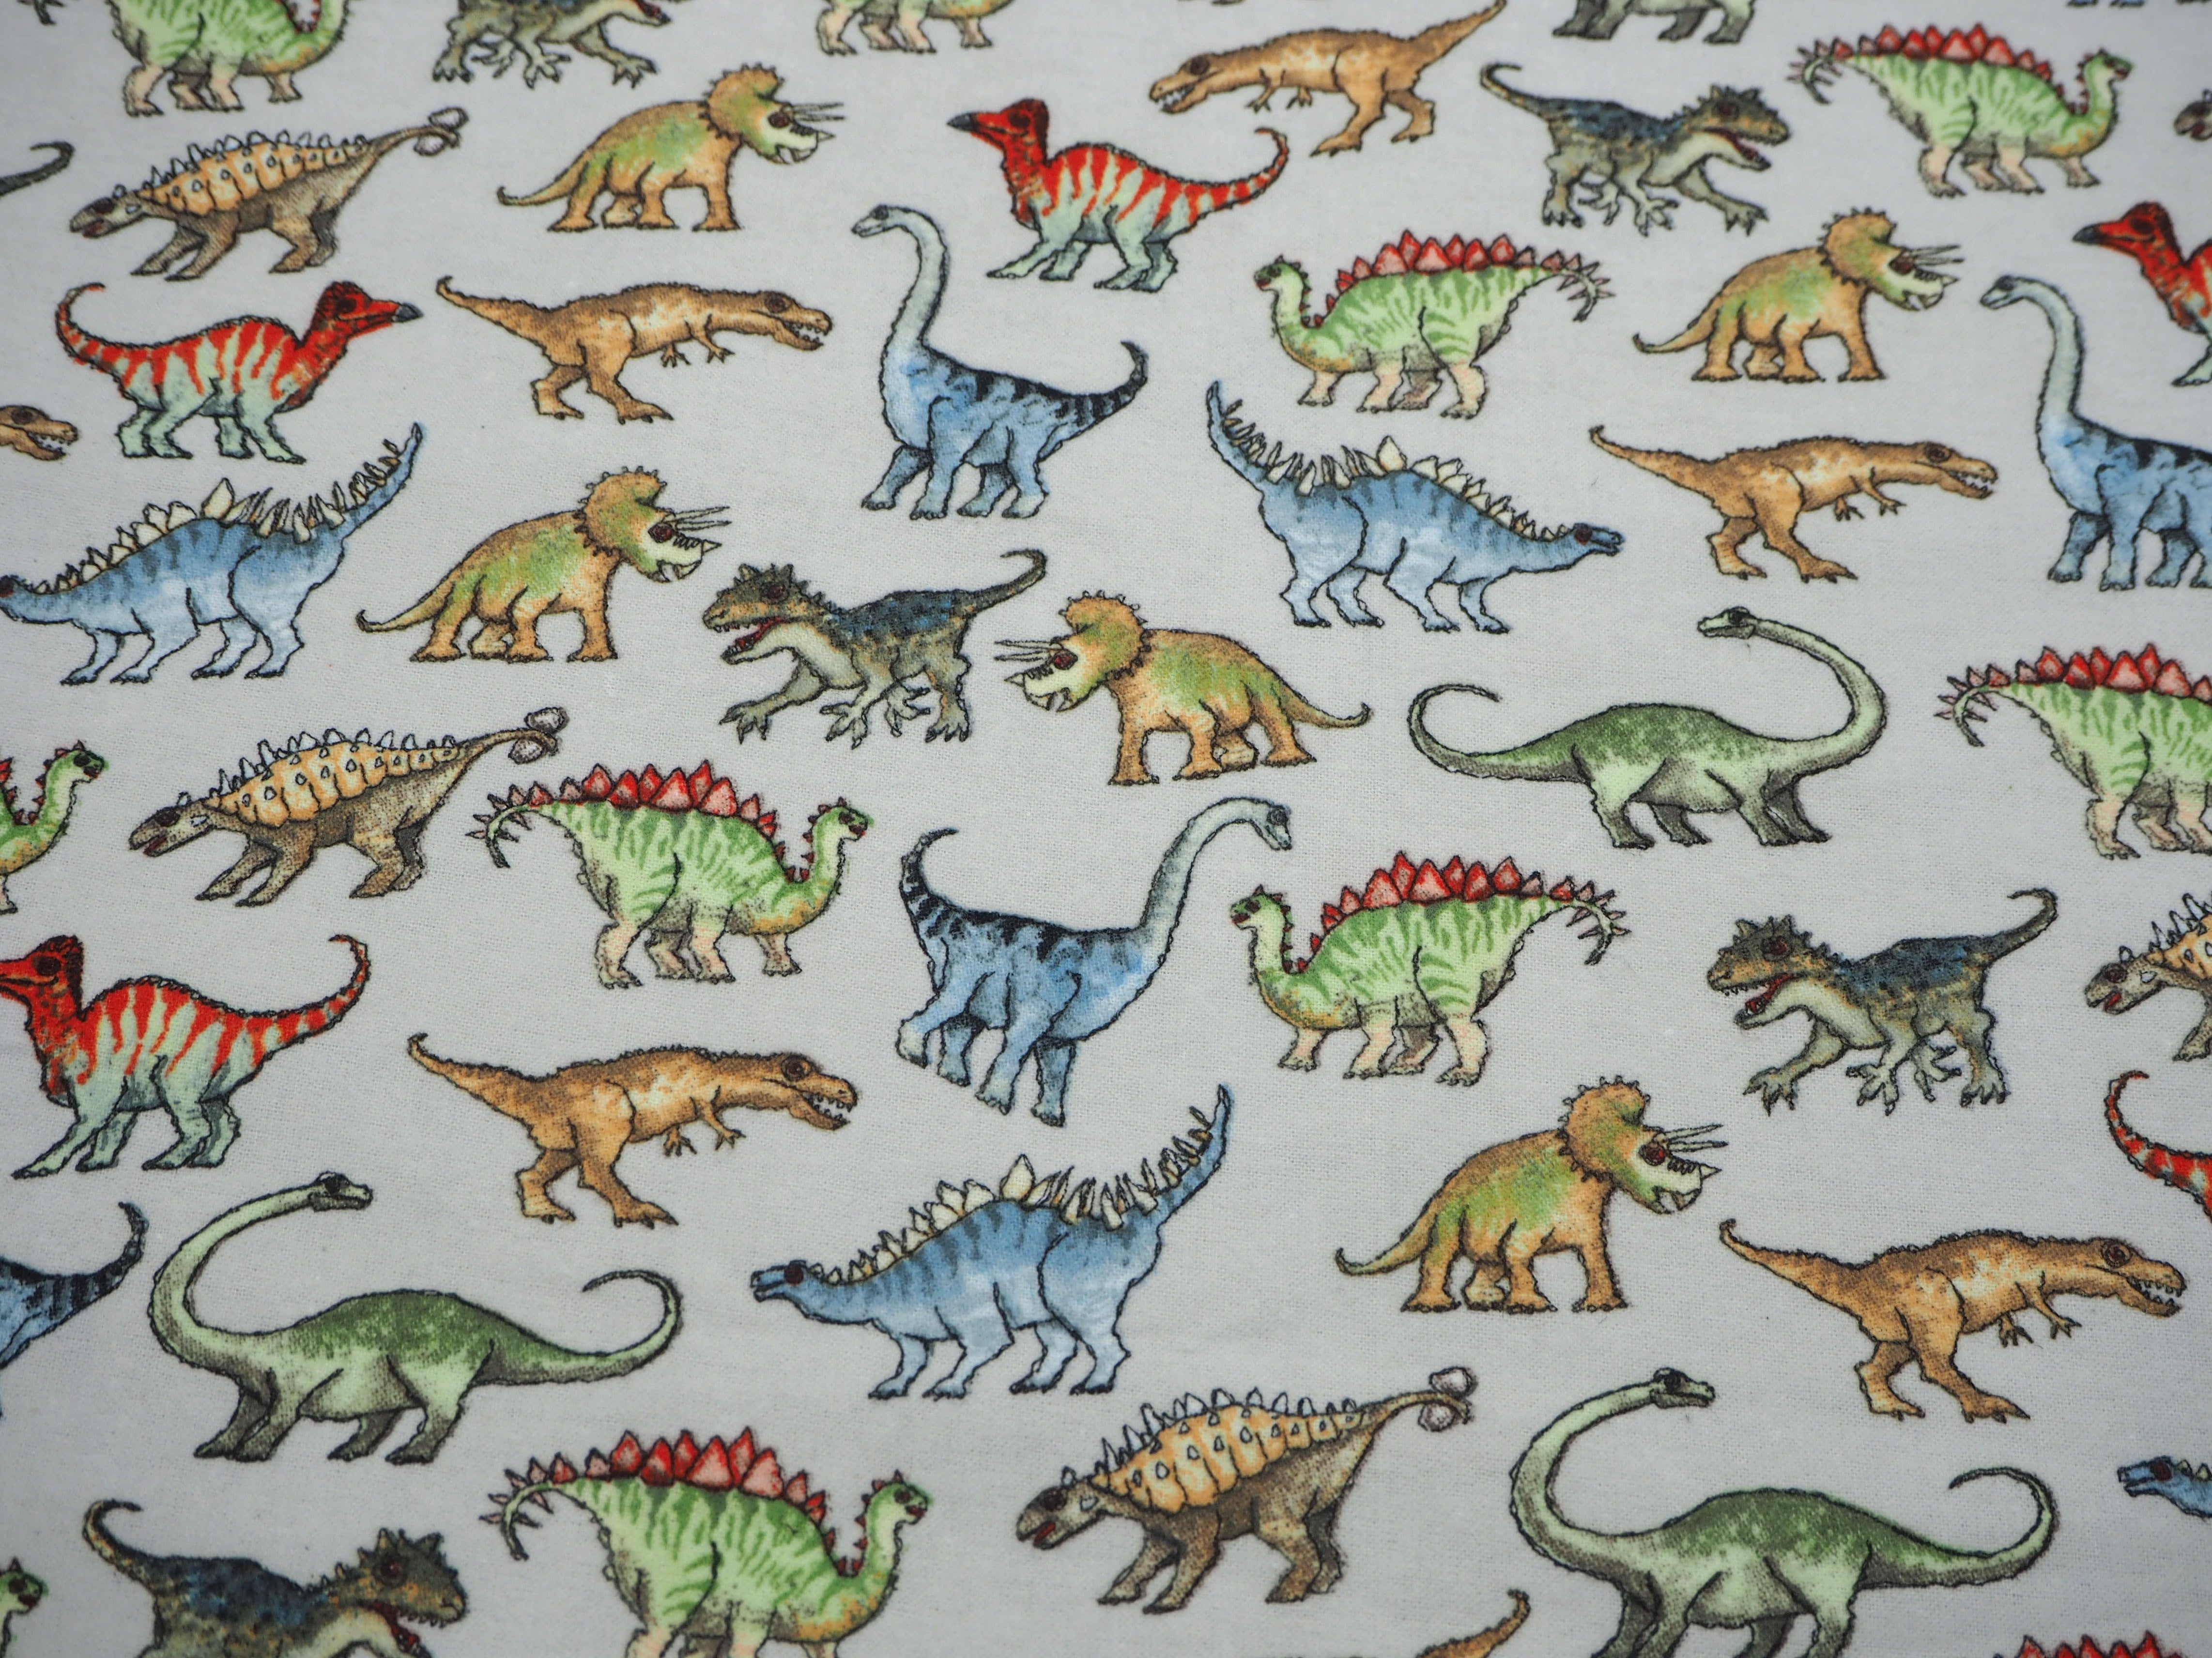 Flannelette fabric featuring colorful dinosaurs on soft grey background